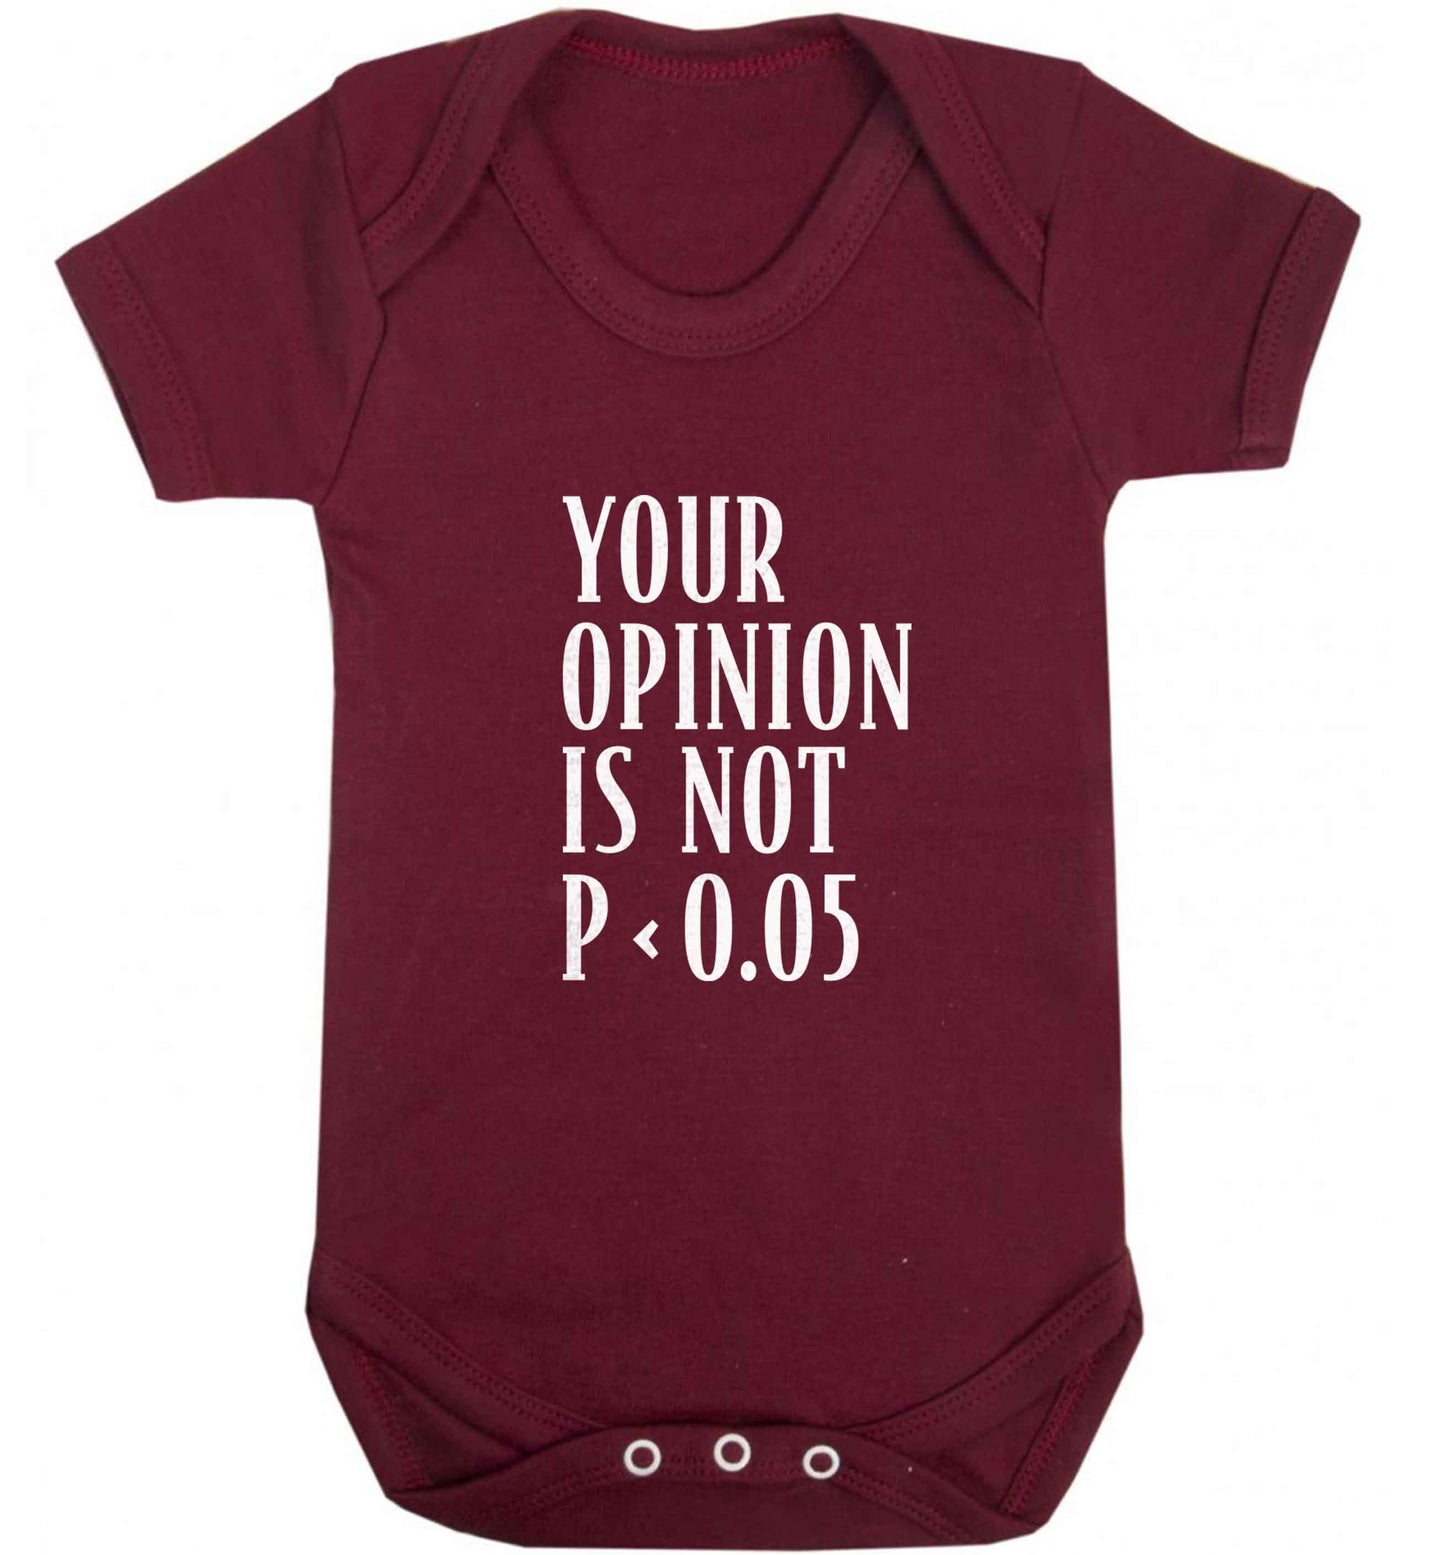 Your opinion is not P < 0.05baby vest maroon 18-24 months